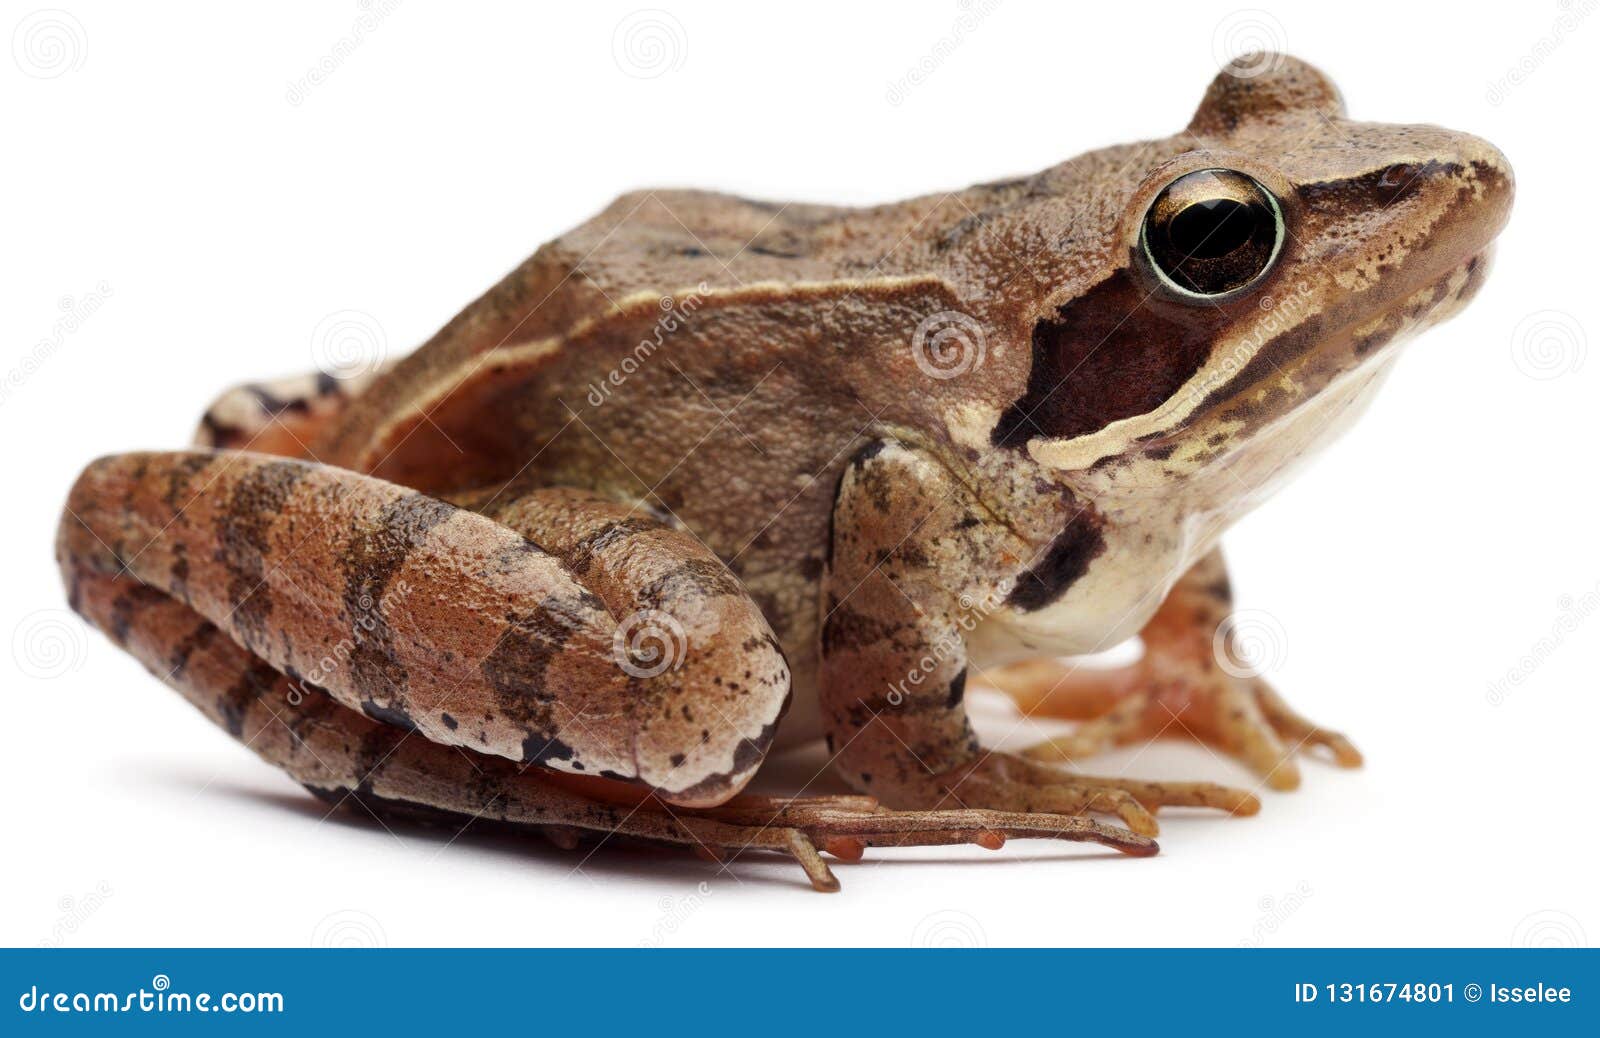 moor frog, rana arvalis, in front of white background